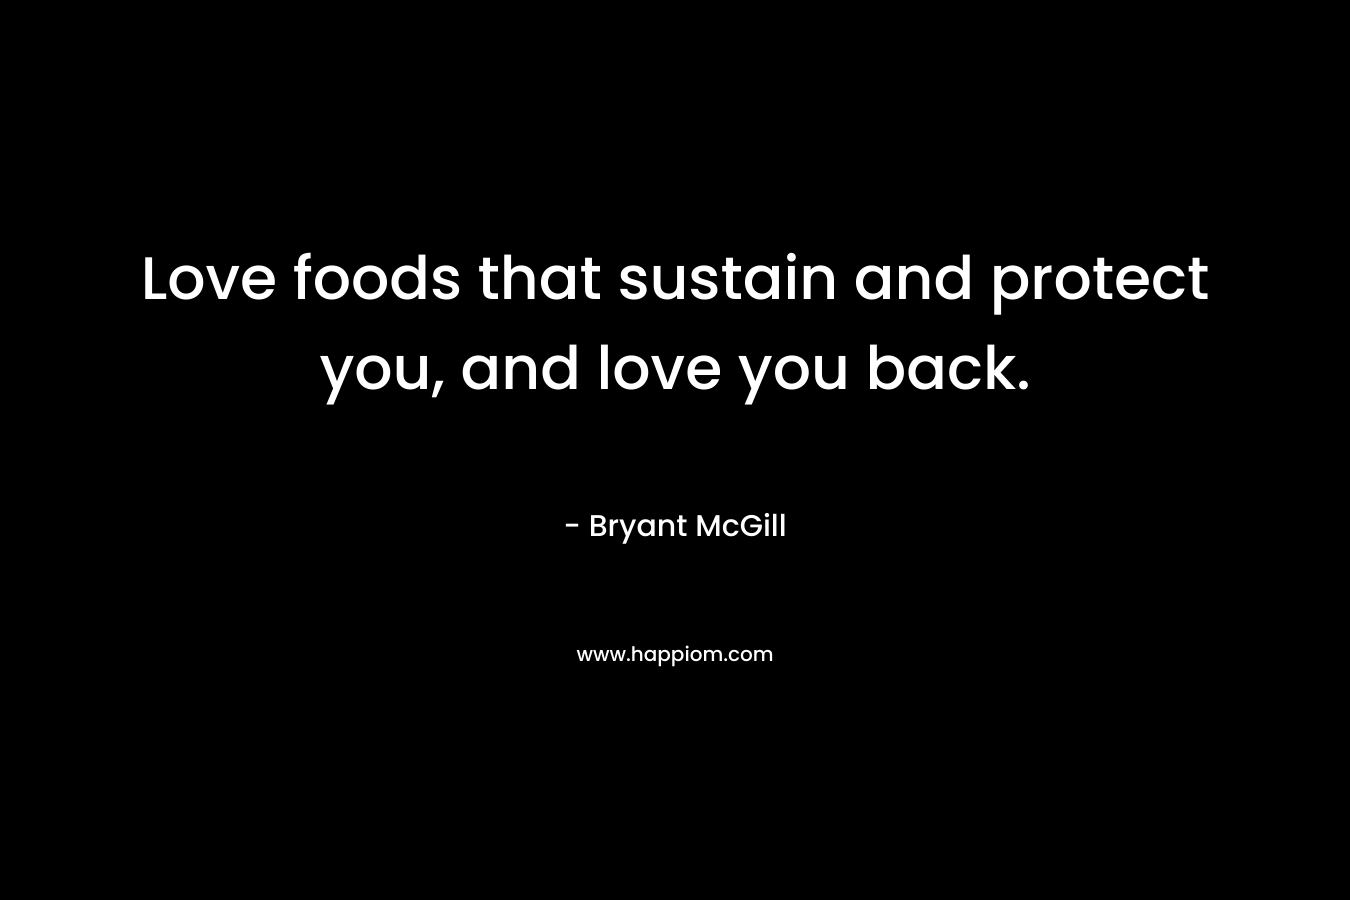 Love foods that sustain and protect you, and love you back. – Bryant McGill